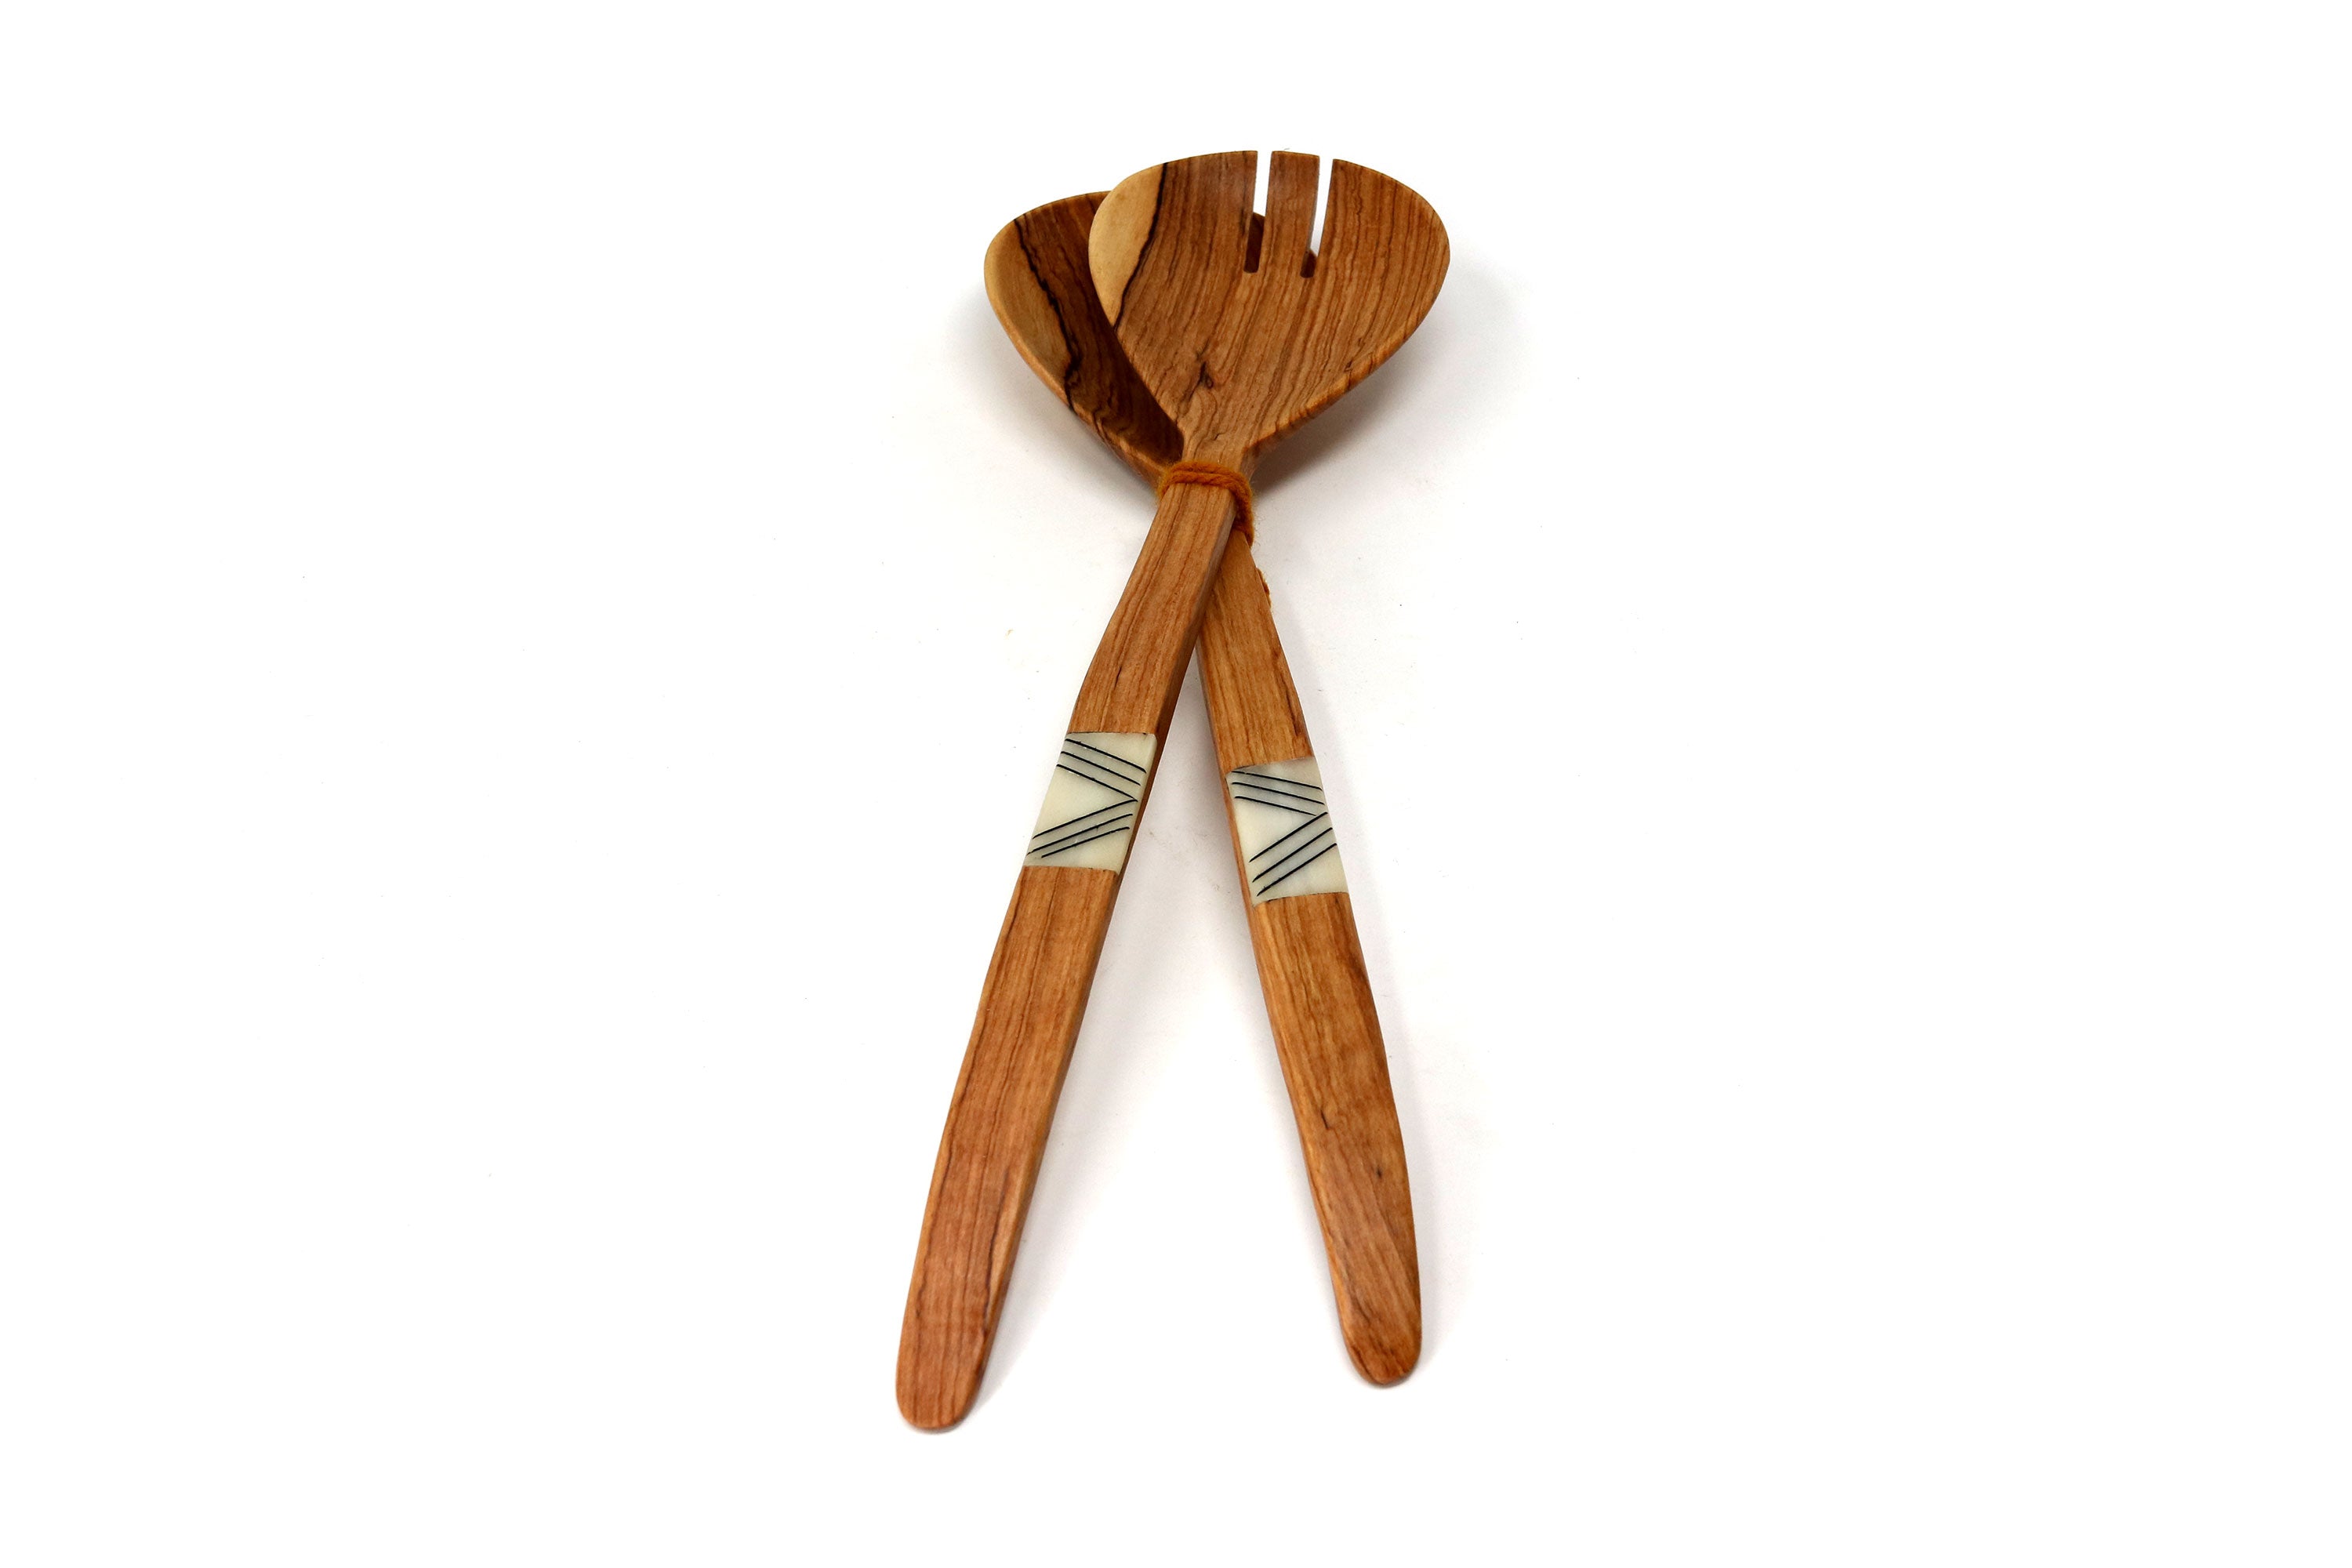 Olive Wood Salad Servers with Bone Inlay in Handle